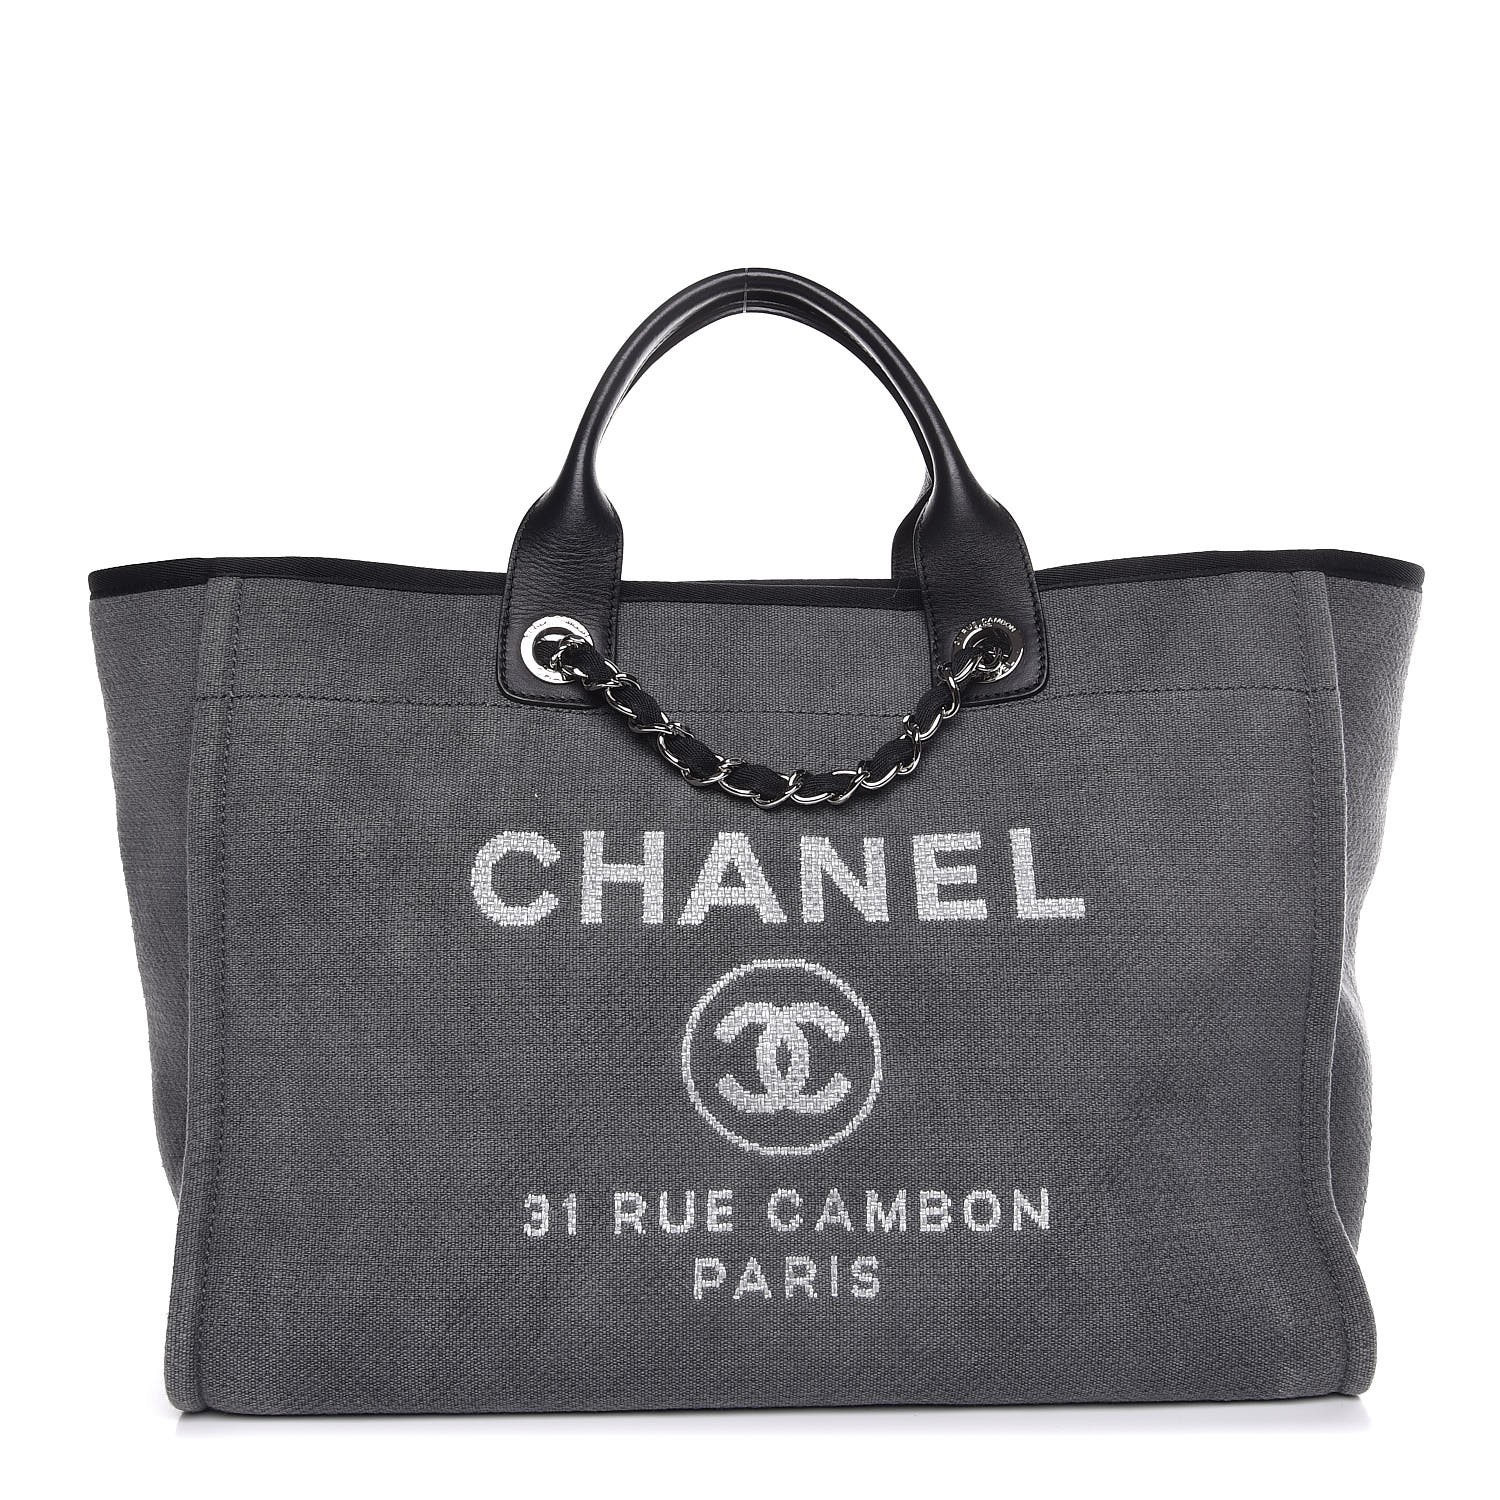 CHANEL Canvas Deauville Large Tote Grey 338289